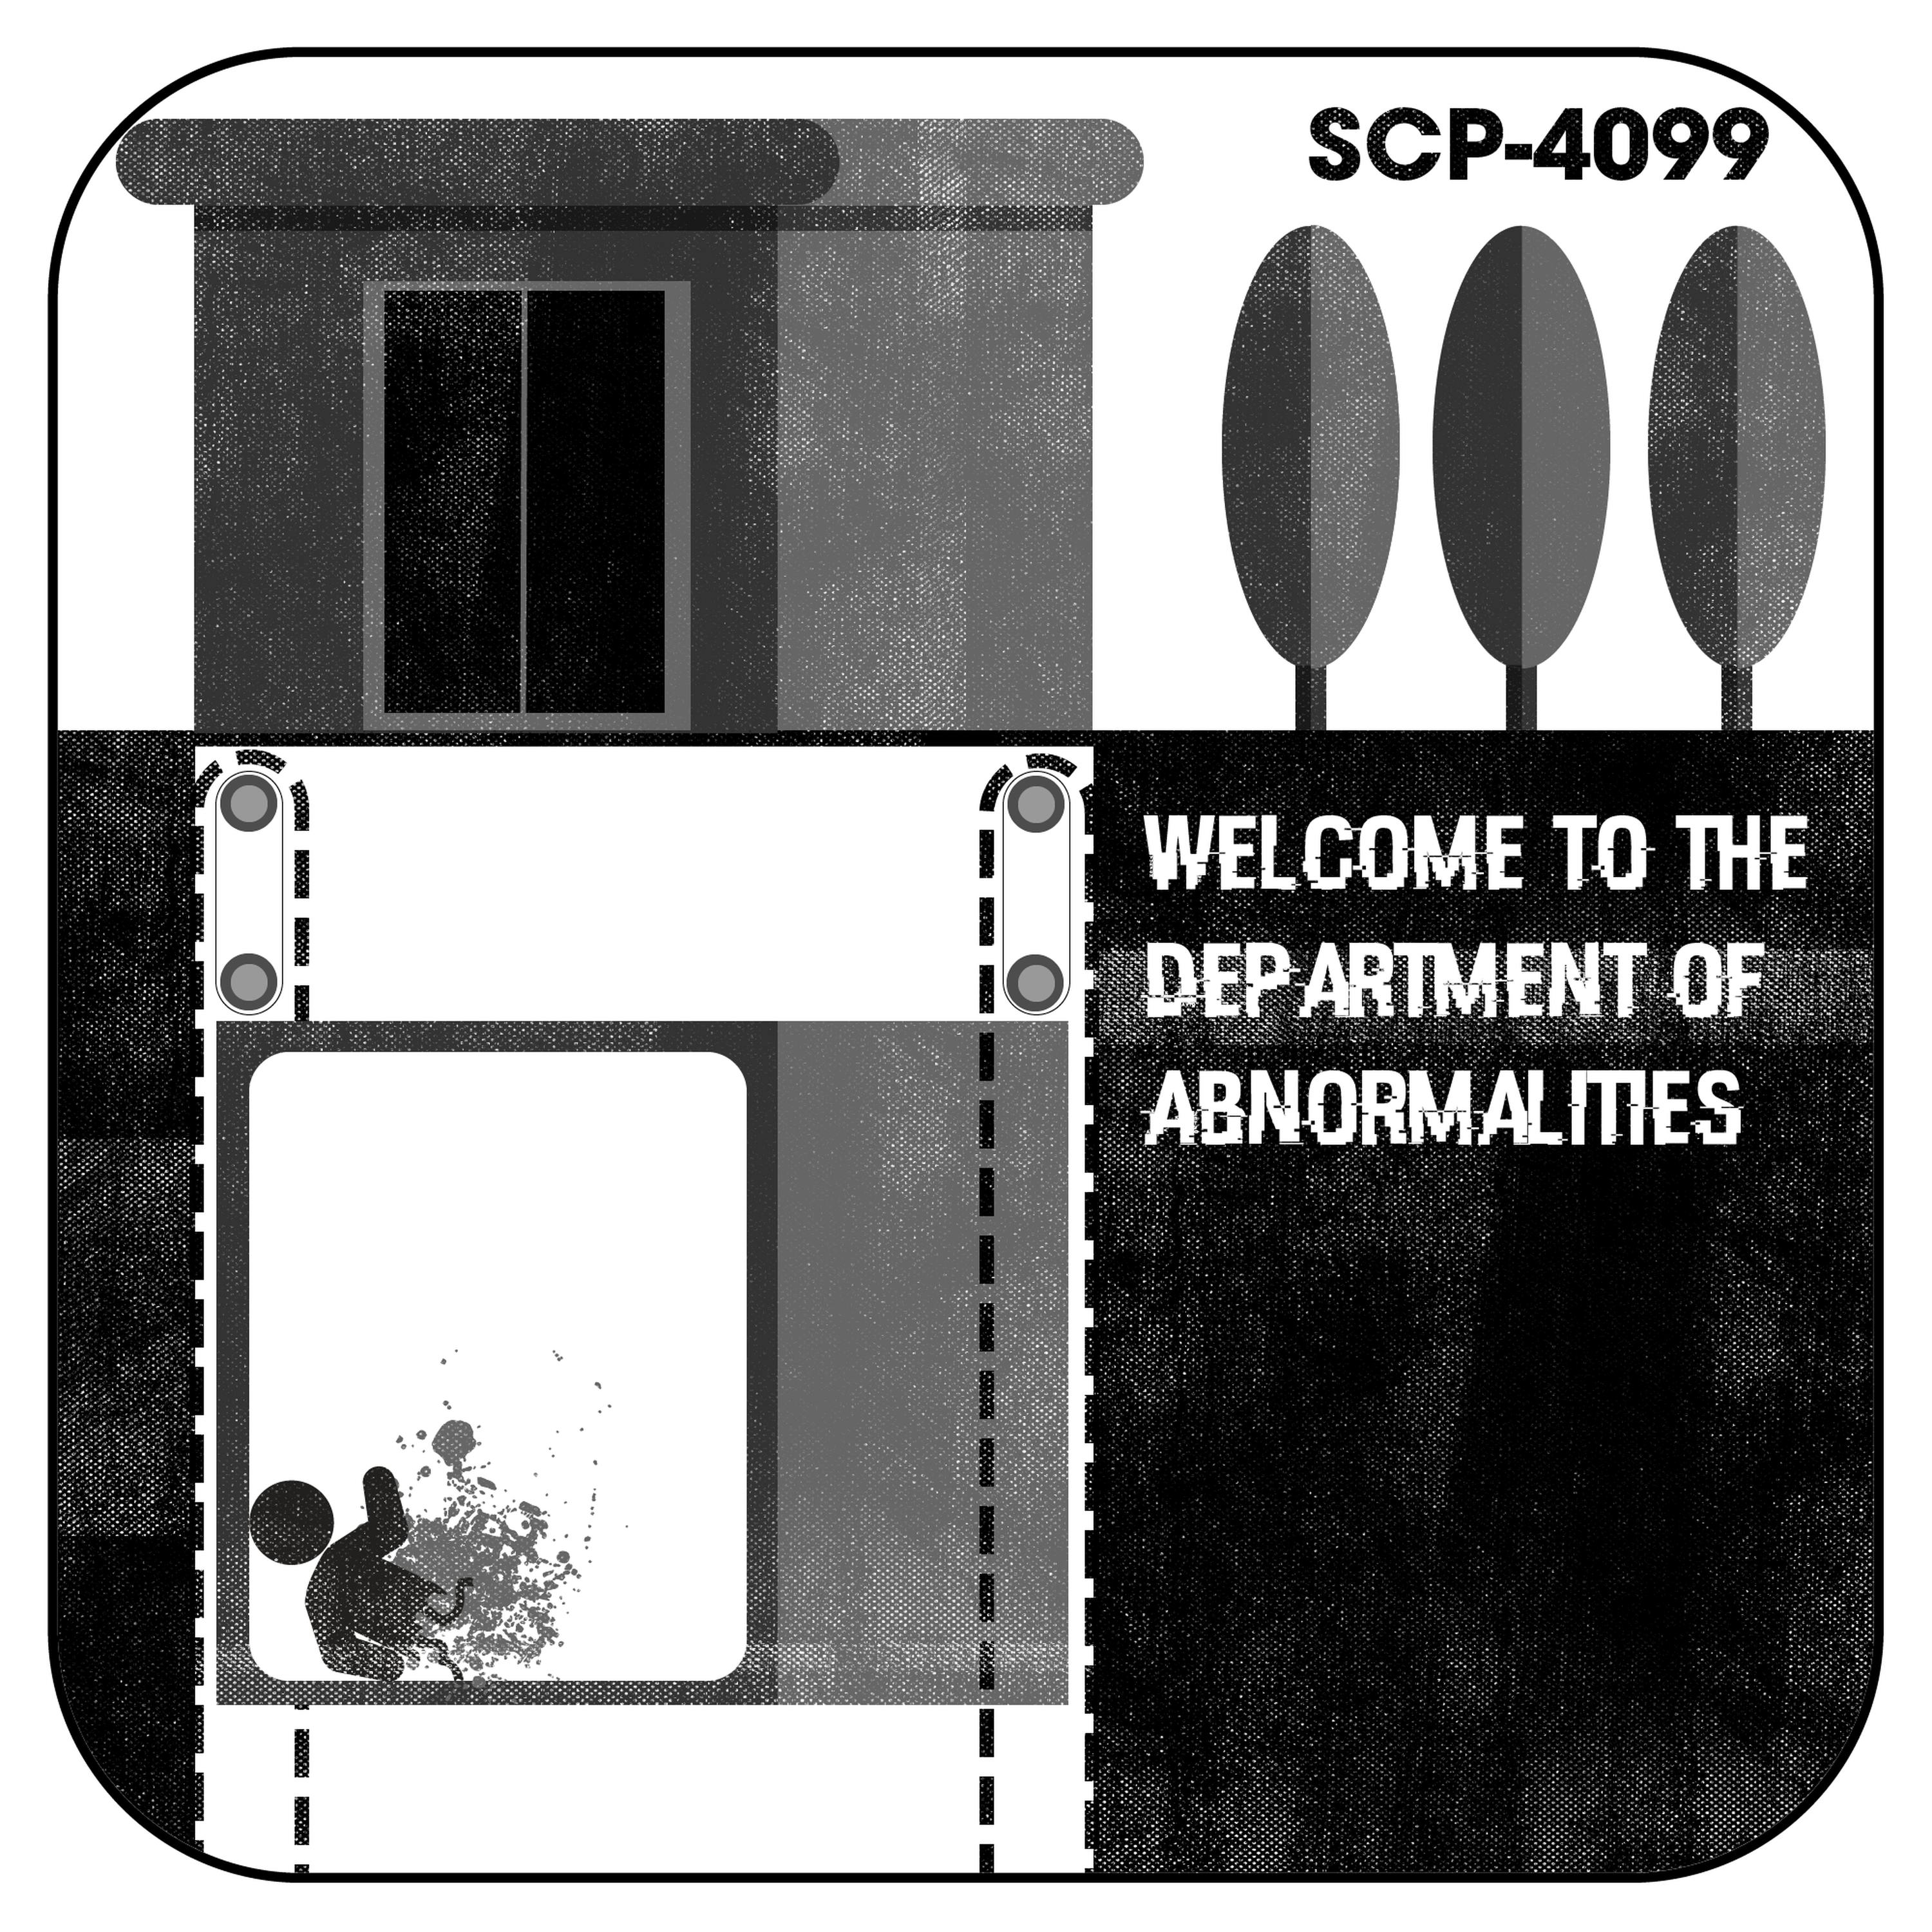 SCP-4099: ”Department of Abnormalities”